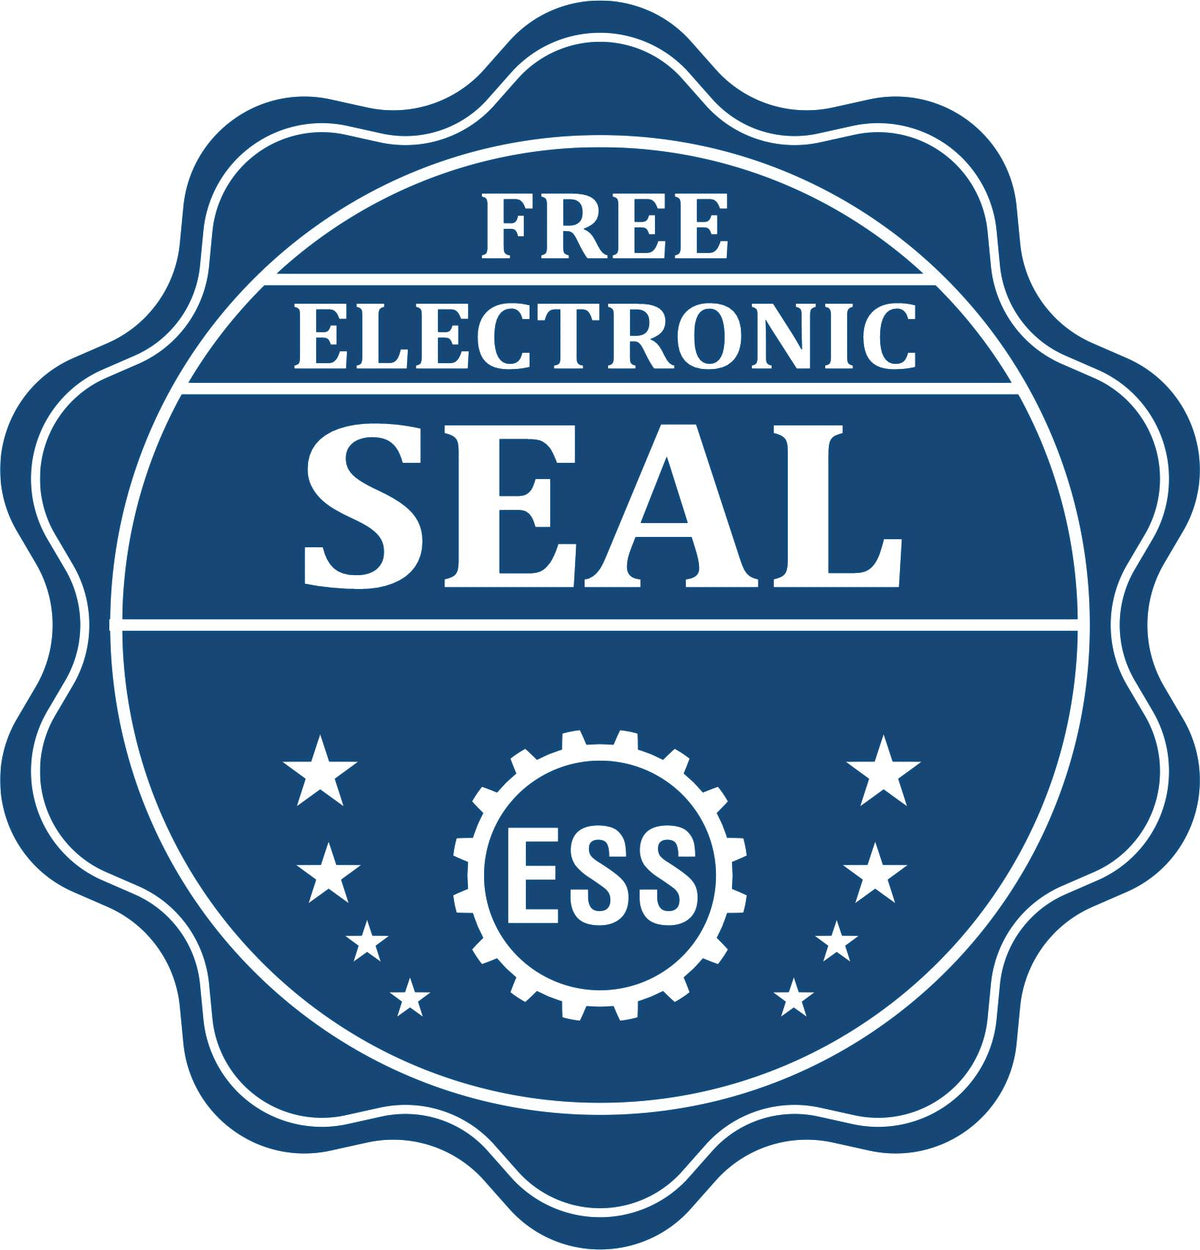 A badge showing a free electronic seal for the Alabama Professional Engineer Seal Stamp with stars and the ESS gear on the emblem.